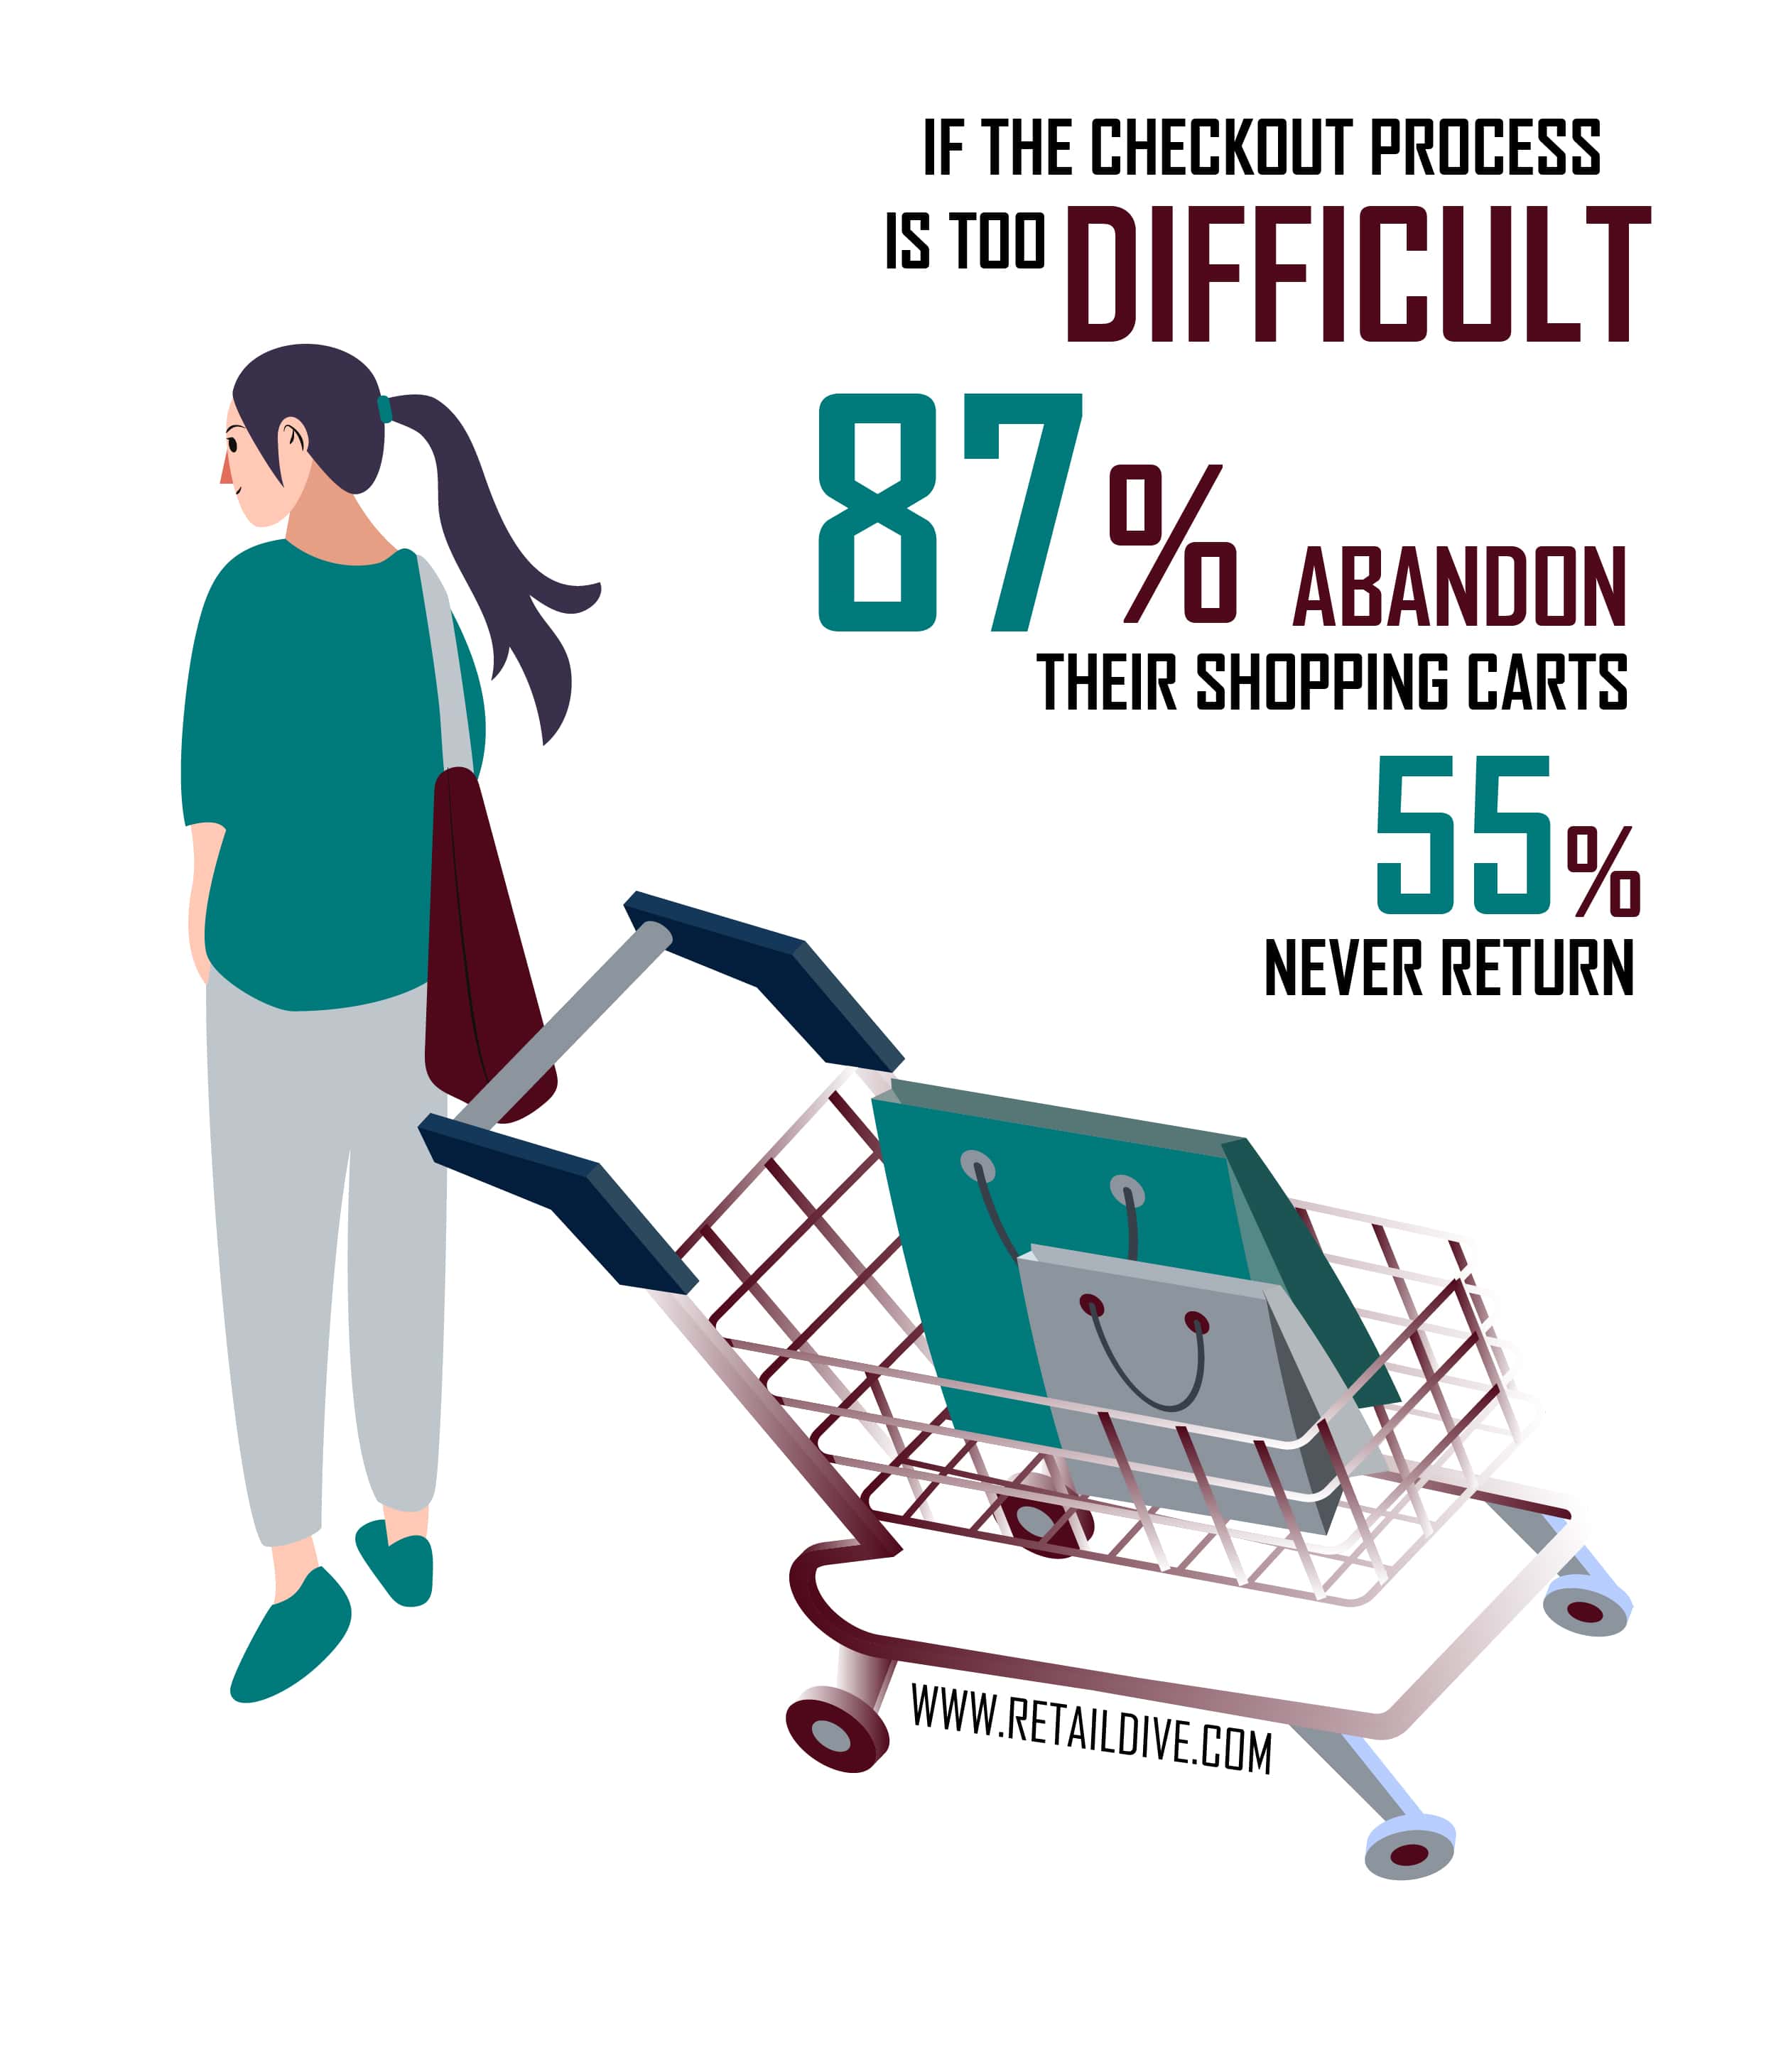 Reasons for Abandoned Shopping Carts - IU Ecommerce Support Services